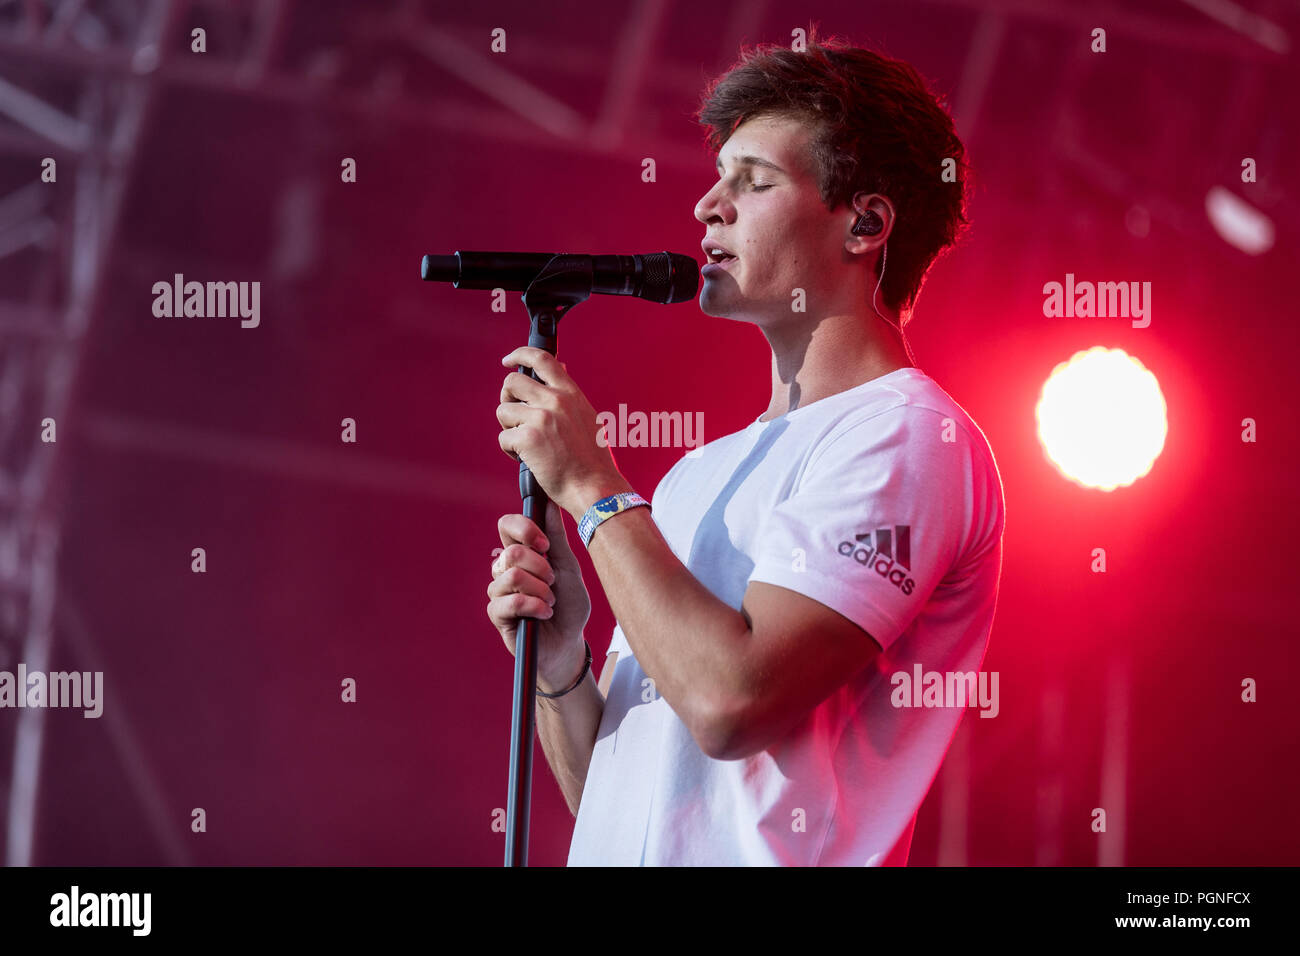 The German pop singer Wincent Weiss live at the 28th Heitere Open Air in Zofingen, Aargau, Switzerland Stock Photo